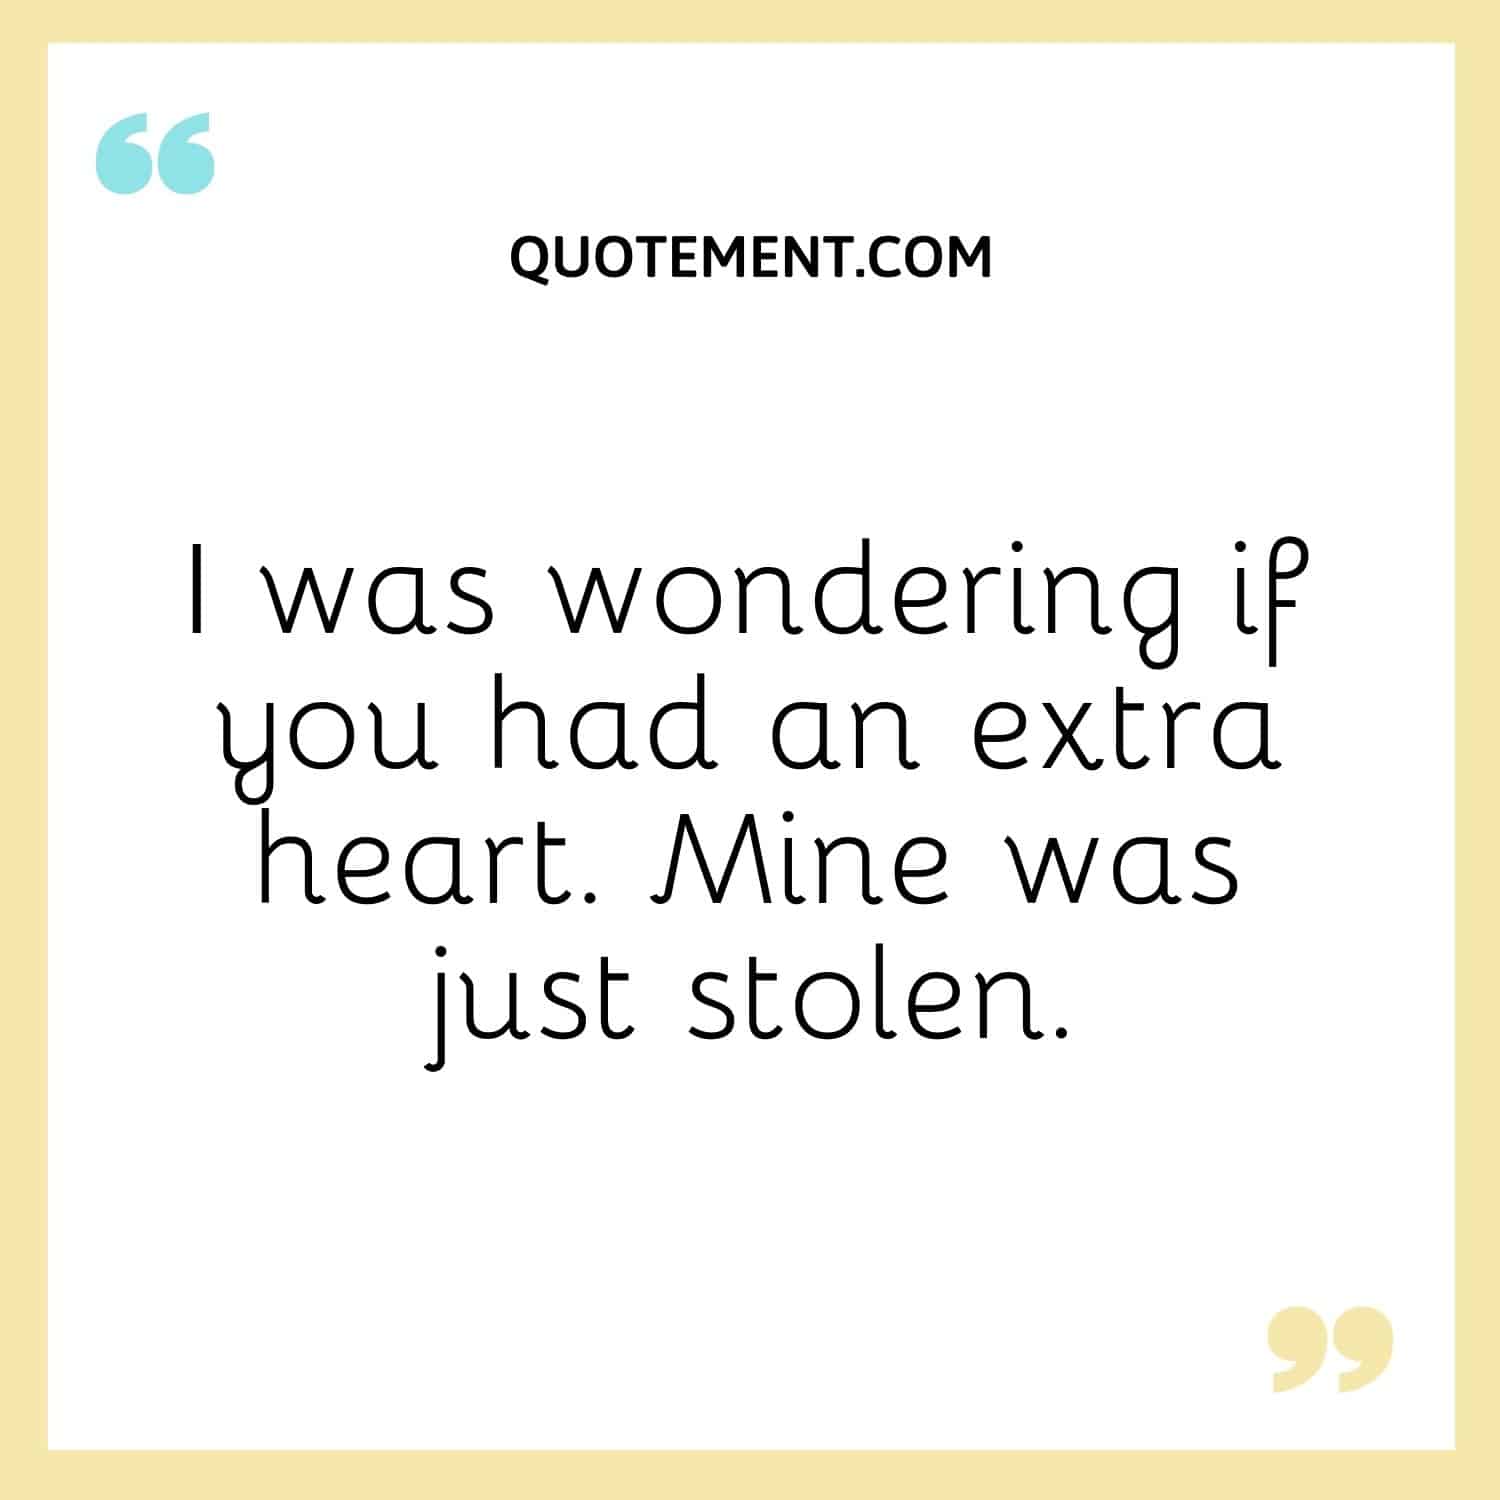 I was wondering if you had an extra heart. Mine was just stolen